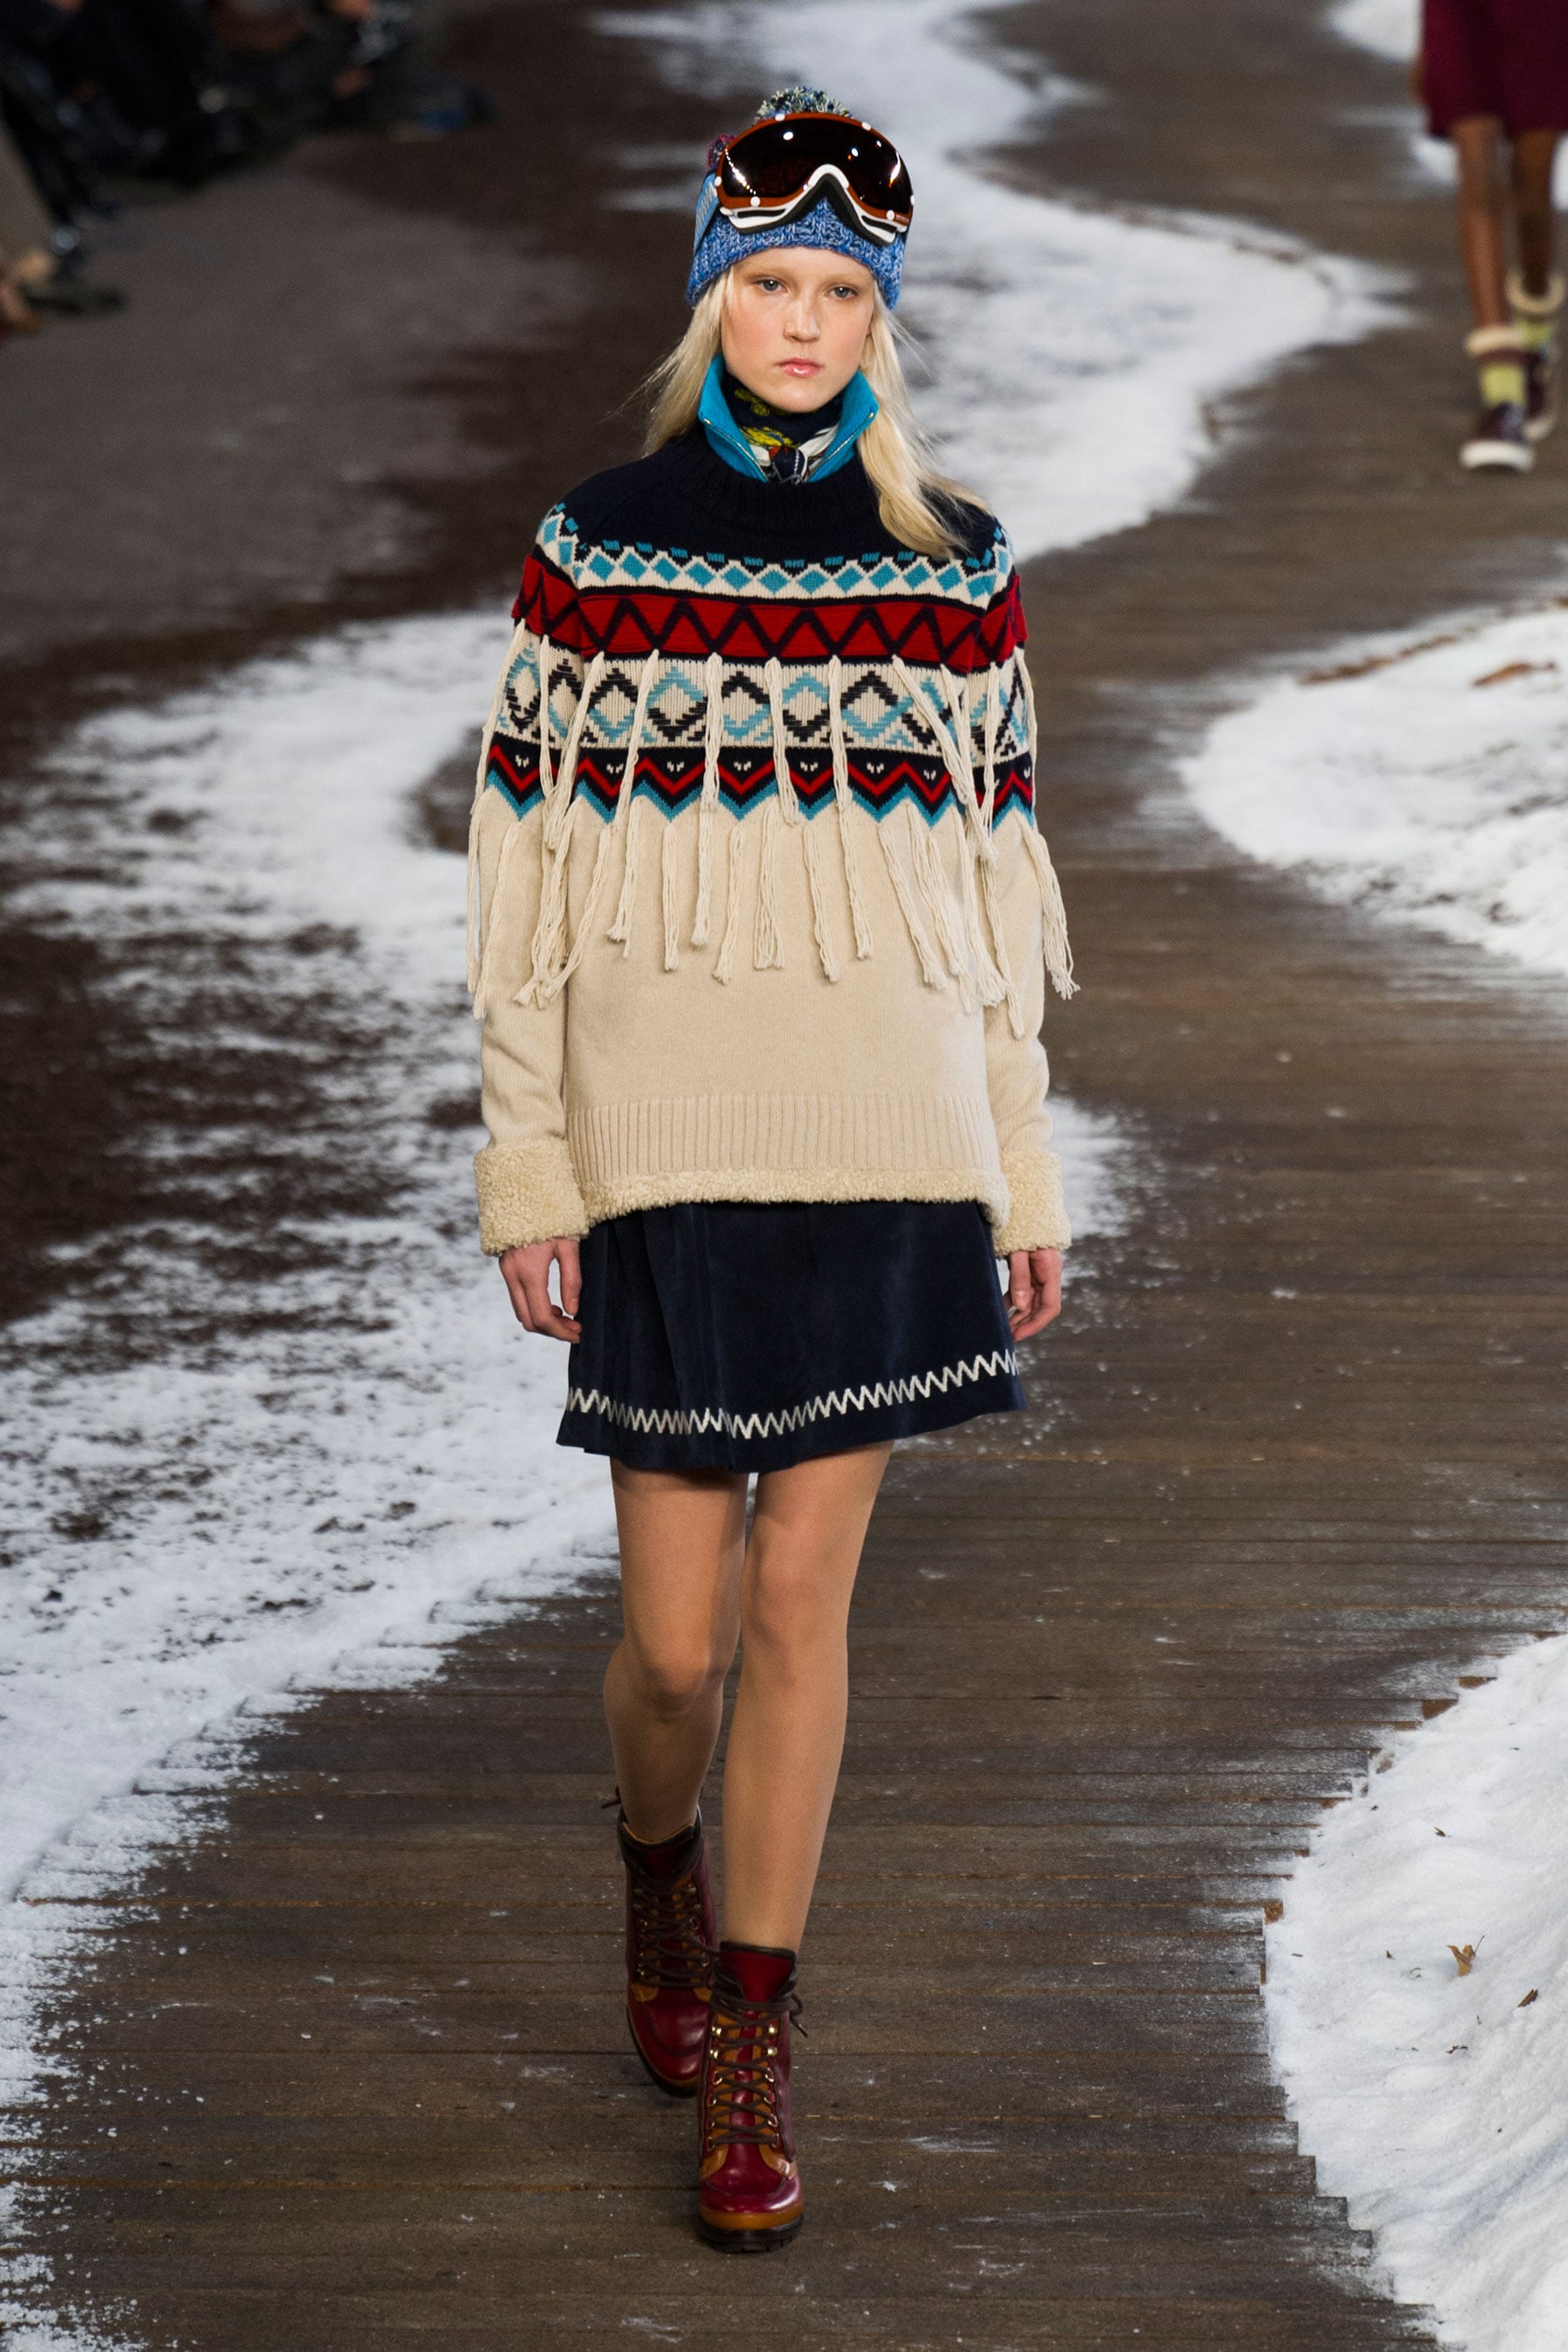 Tommy Hilfiger Fall 2014 | We Want to Do More Than With Tommy Hilfiger | POPSUGAR Fashion Photo 18